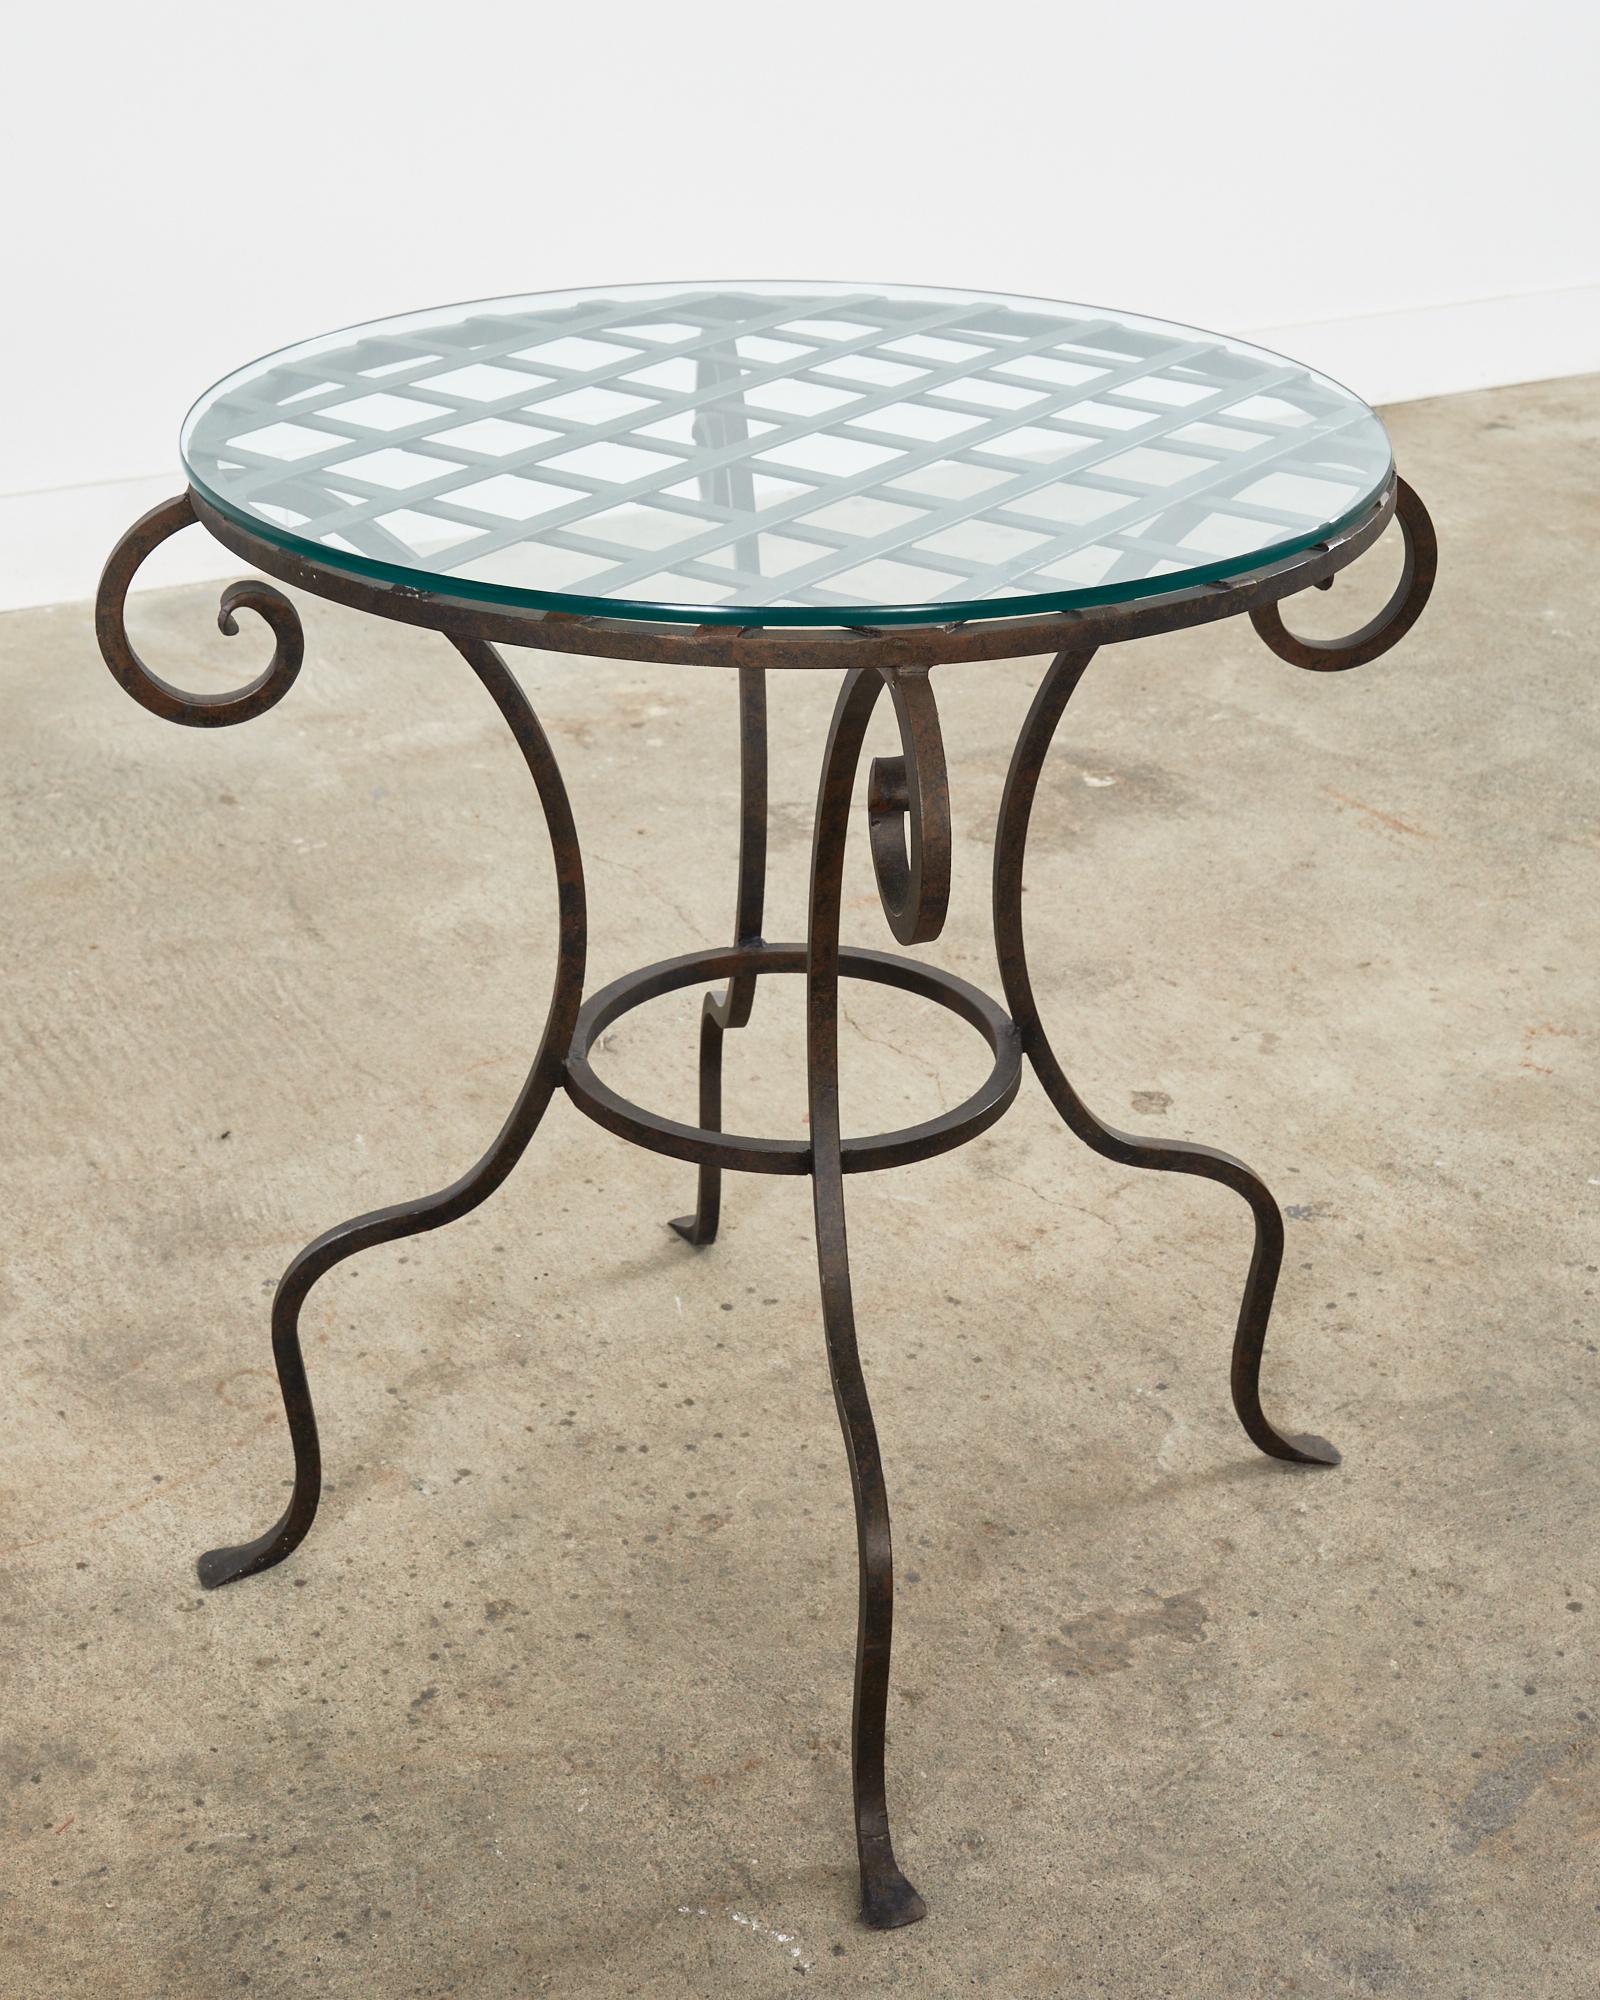 Glass Rose Tarlow Style Wrought Iron Patio Garden Dining Table For Sale